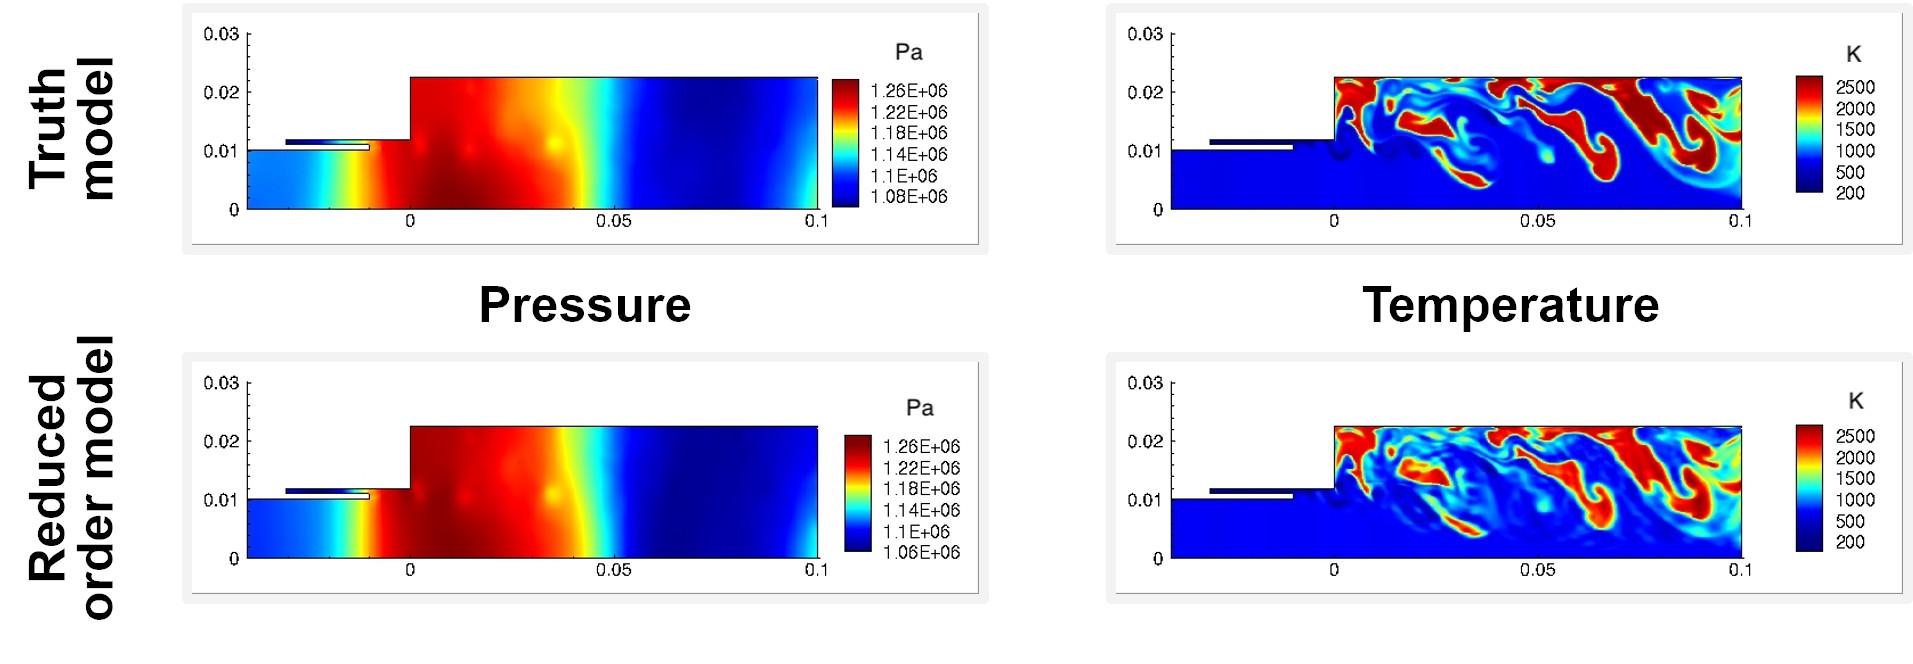 These snapshots of pressure and temperature inside one injector of a rocket engine show that the new reduced-order models can predict complex physics with similar levels of accuracy as existing modeling techniques but in significantly less time and at a fraction of the cost.